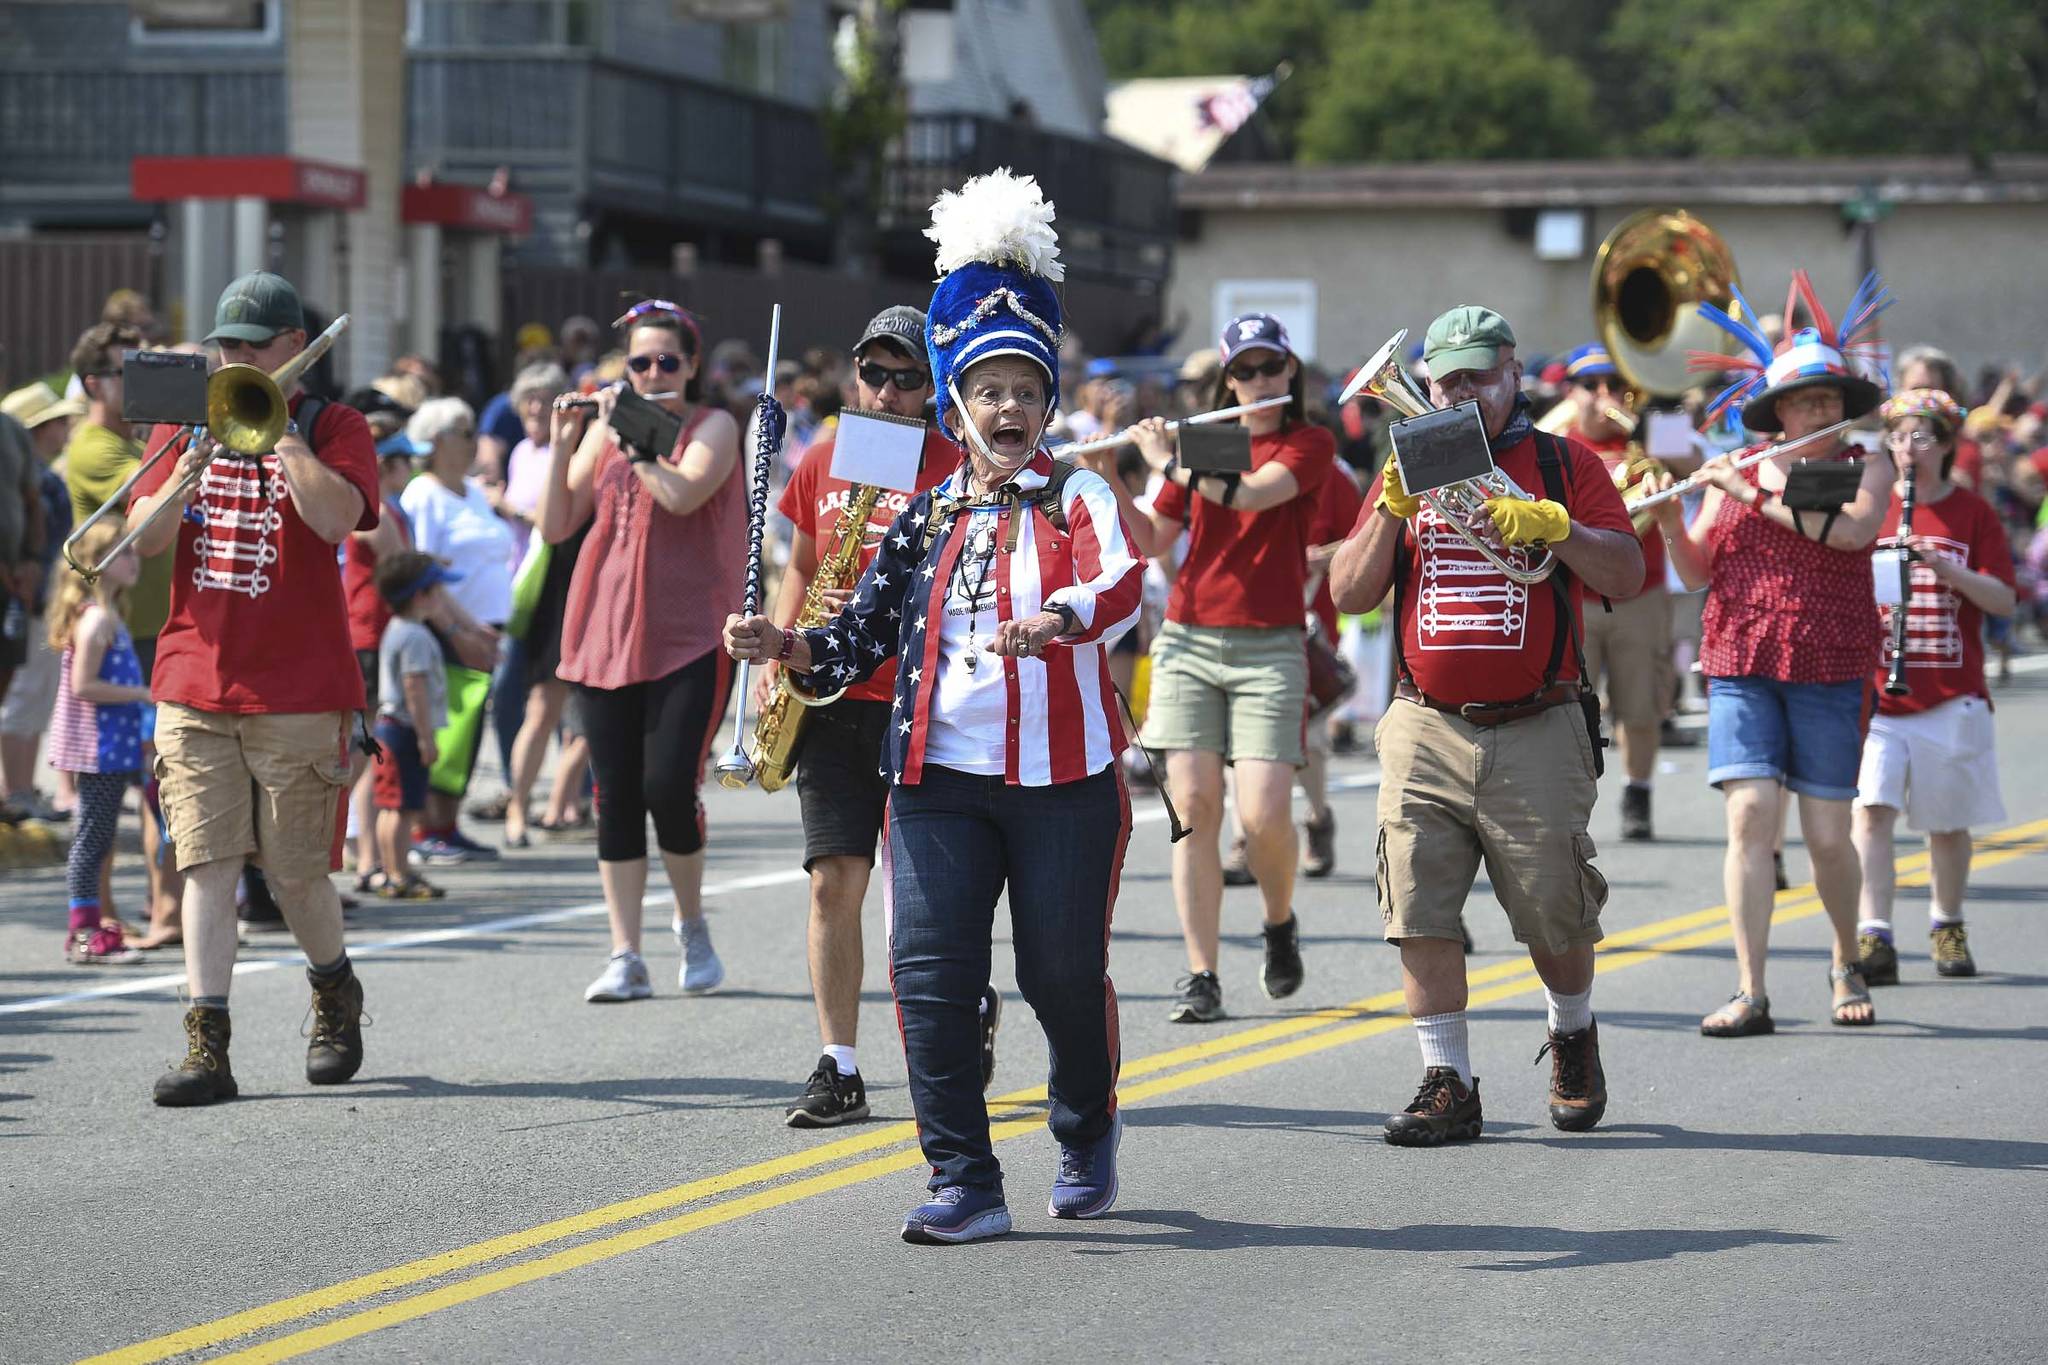 Bea Findlay leads the Juneau Volunteer Marching Band in the Douglas Fourth of July Parade on Thursday, July 4, 2019. (Michael Penn | Juneau Empire)